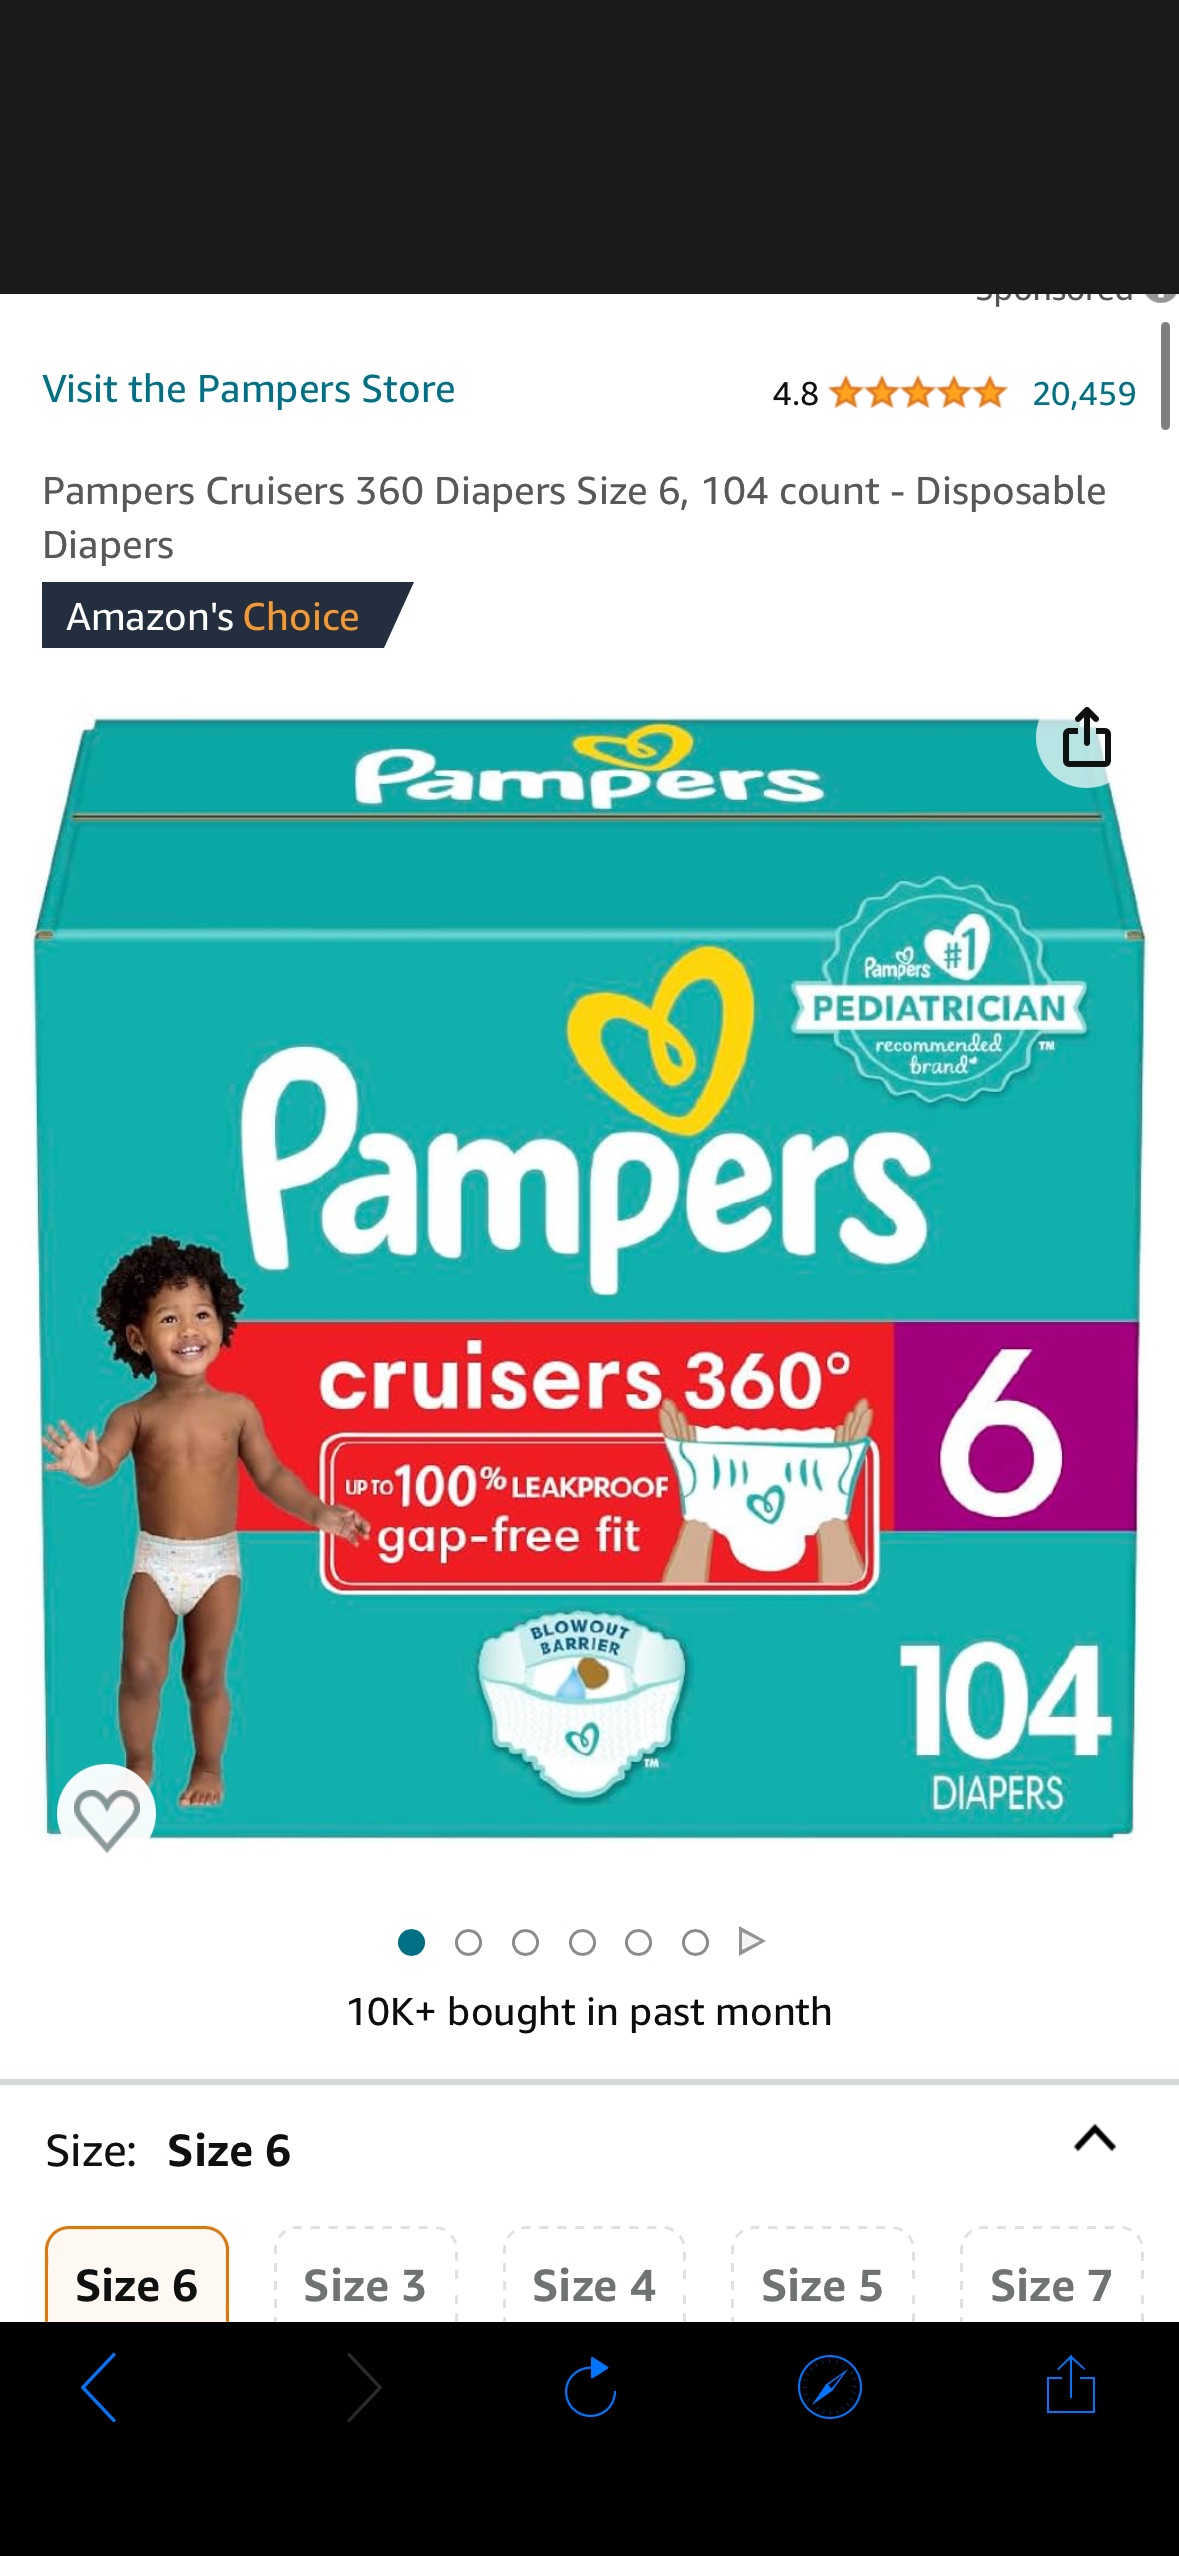 Amazon.com: Pampers Cruisers 360 Diapers Size 6, 104 count - Disposable Diapers : Baby尿不湿